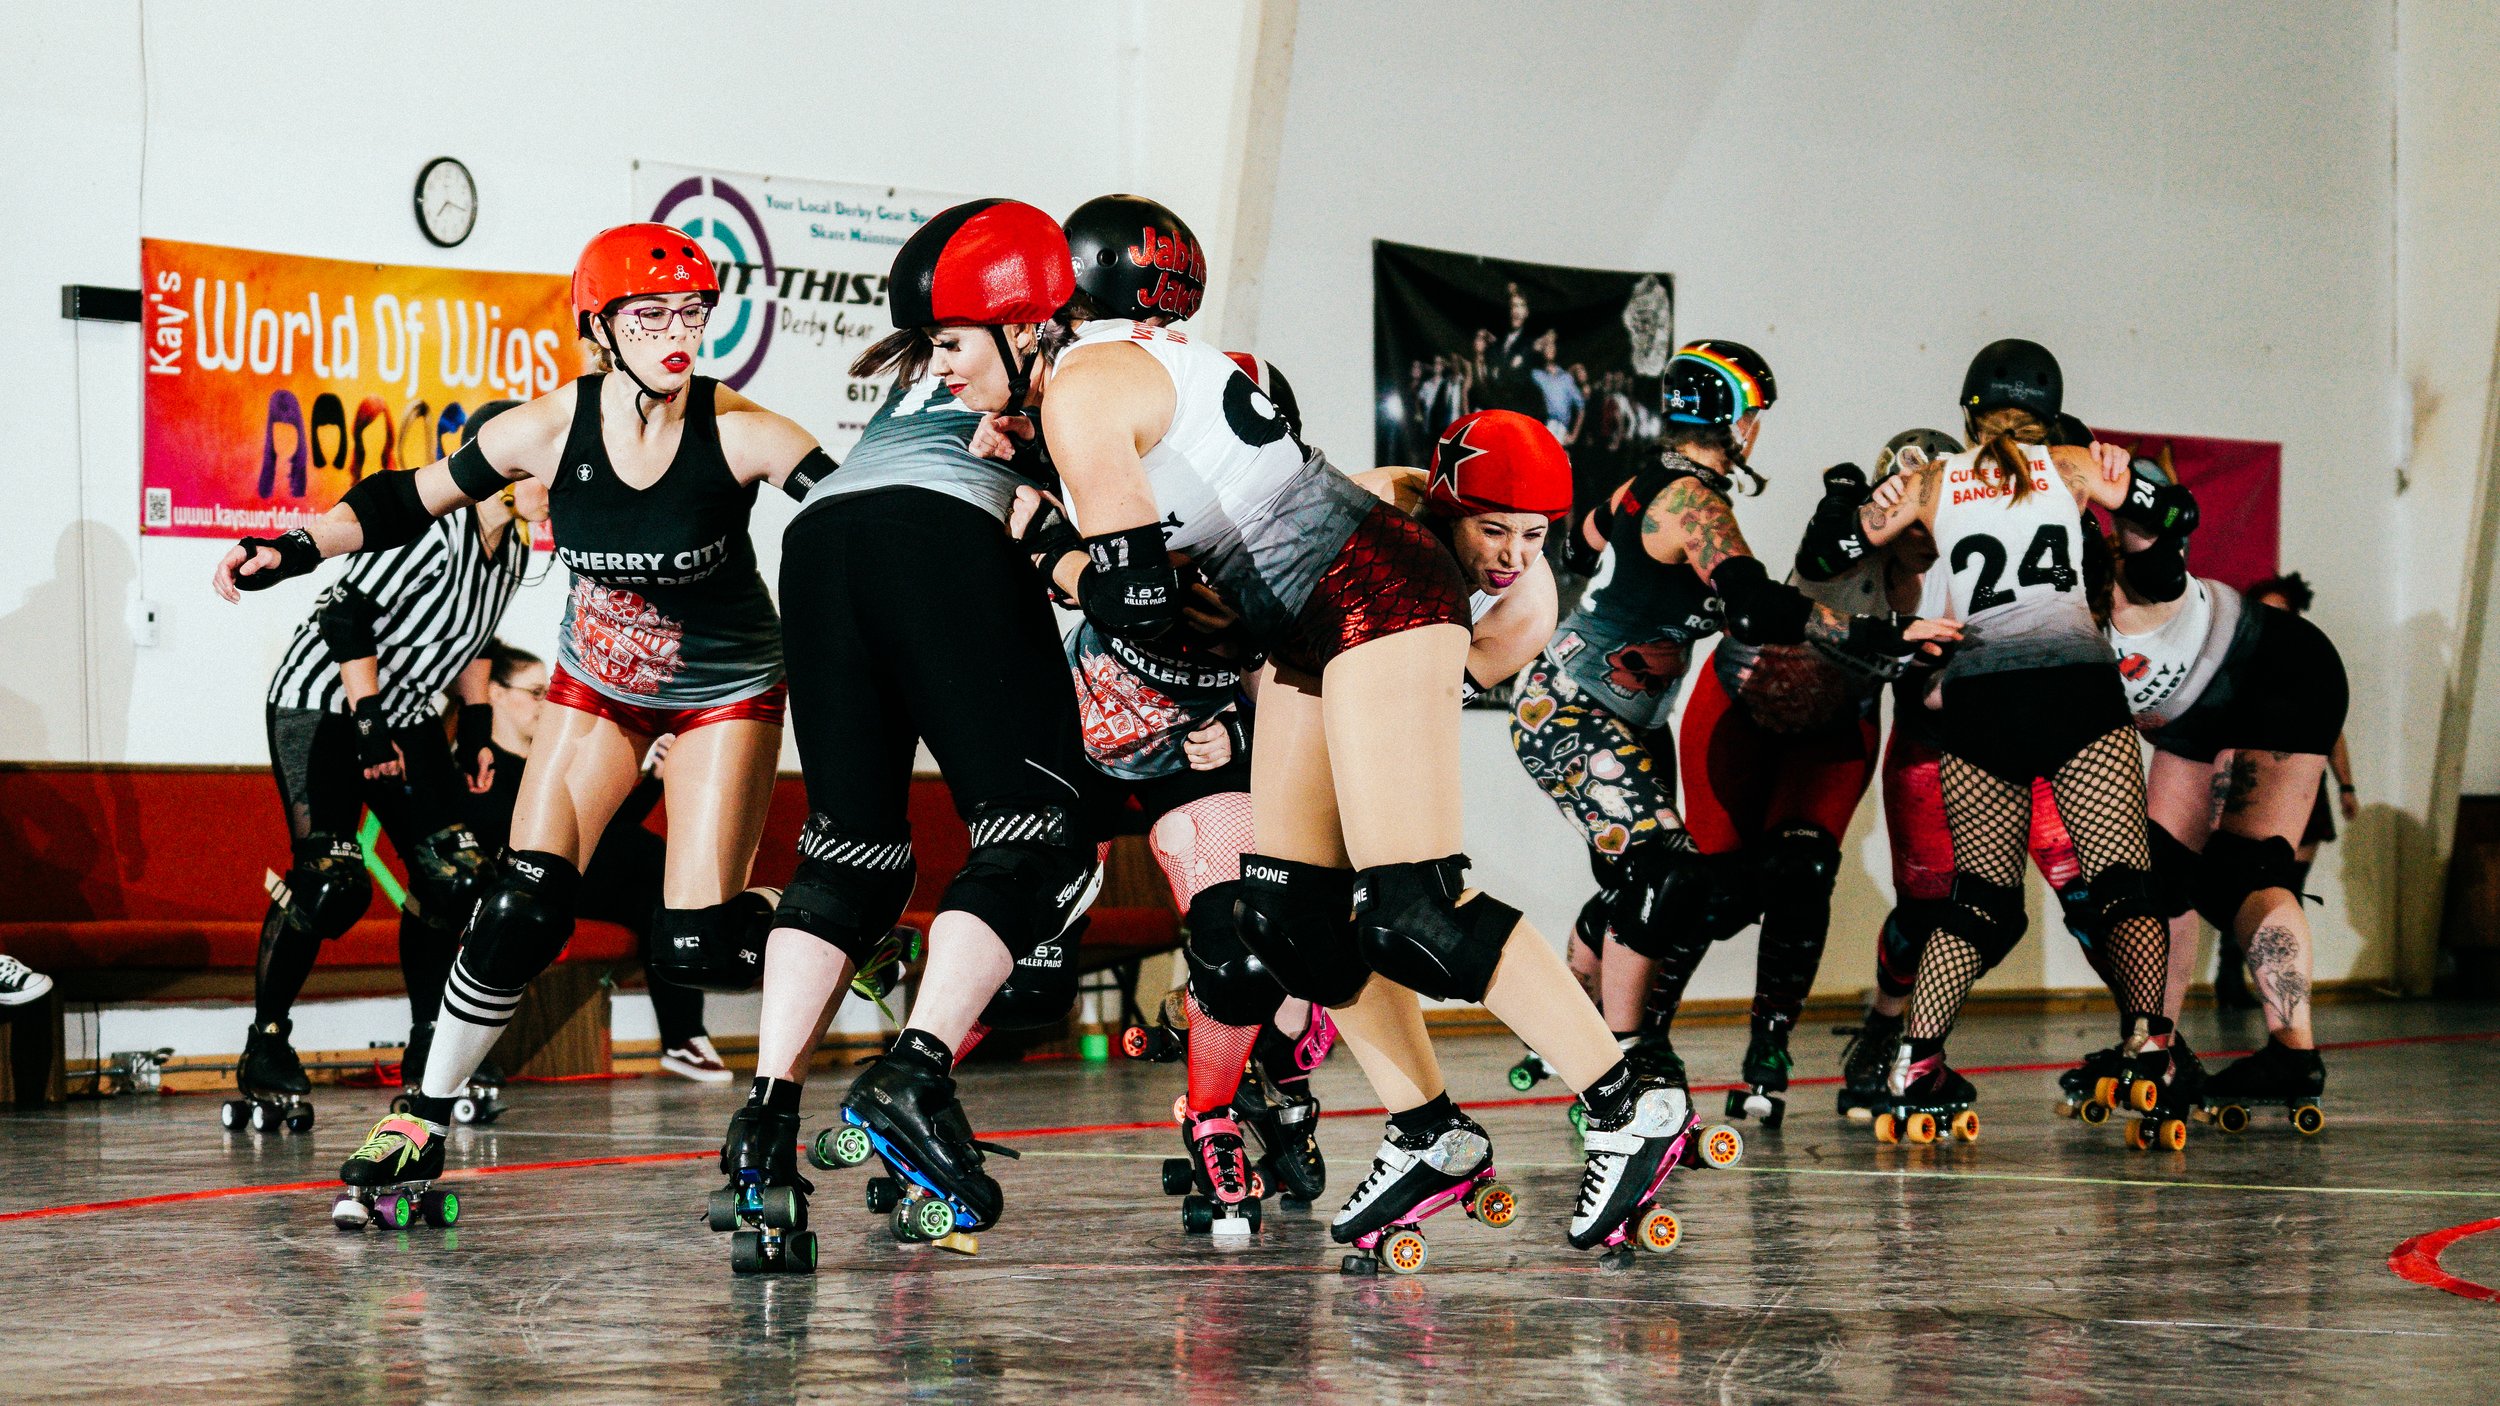 Bouts & Events — Cherry City Roller Derby